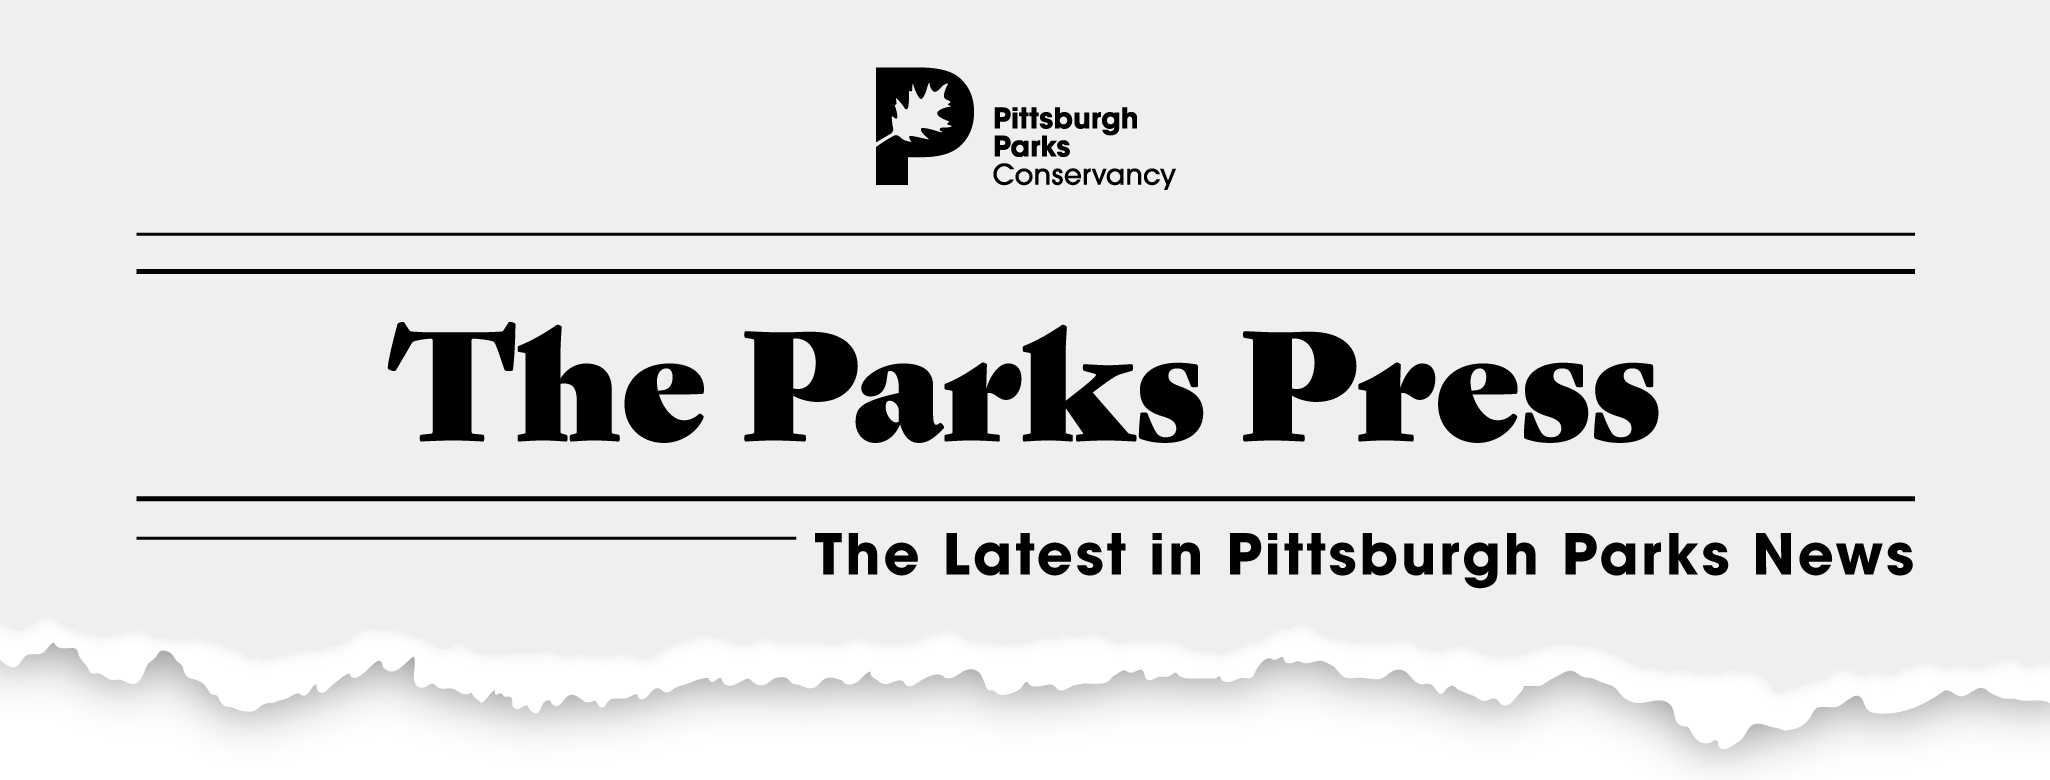 Pittsburgh Parks Press